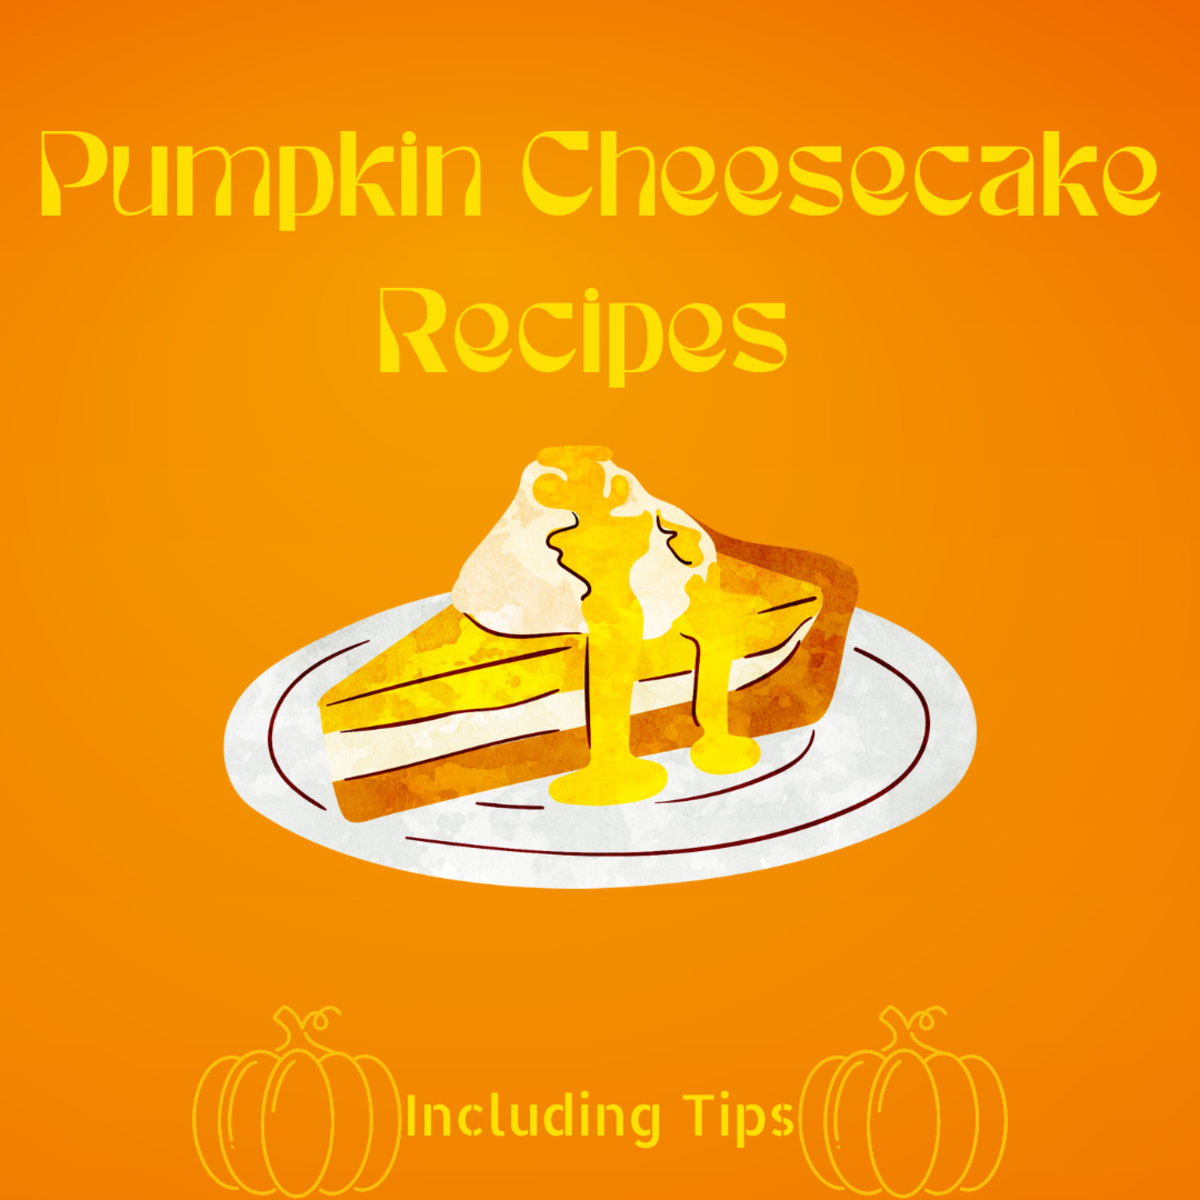 Gourmet Pumpkin Cheesecake Recipes (With Helpful Tips!)